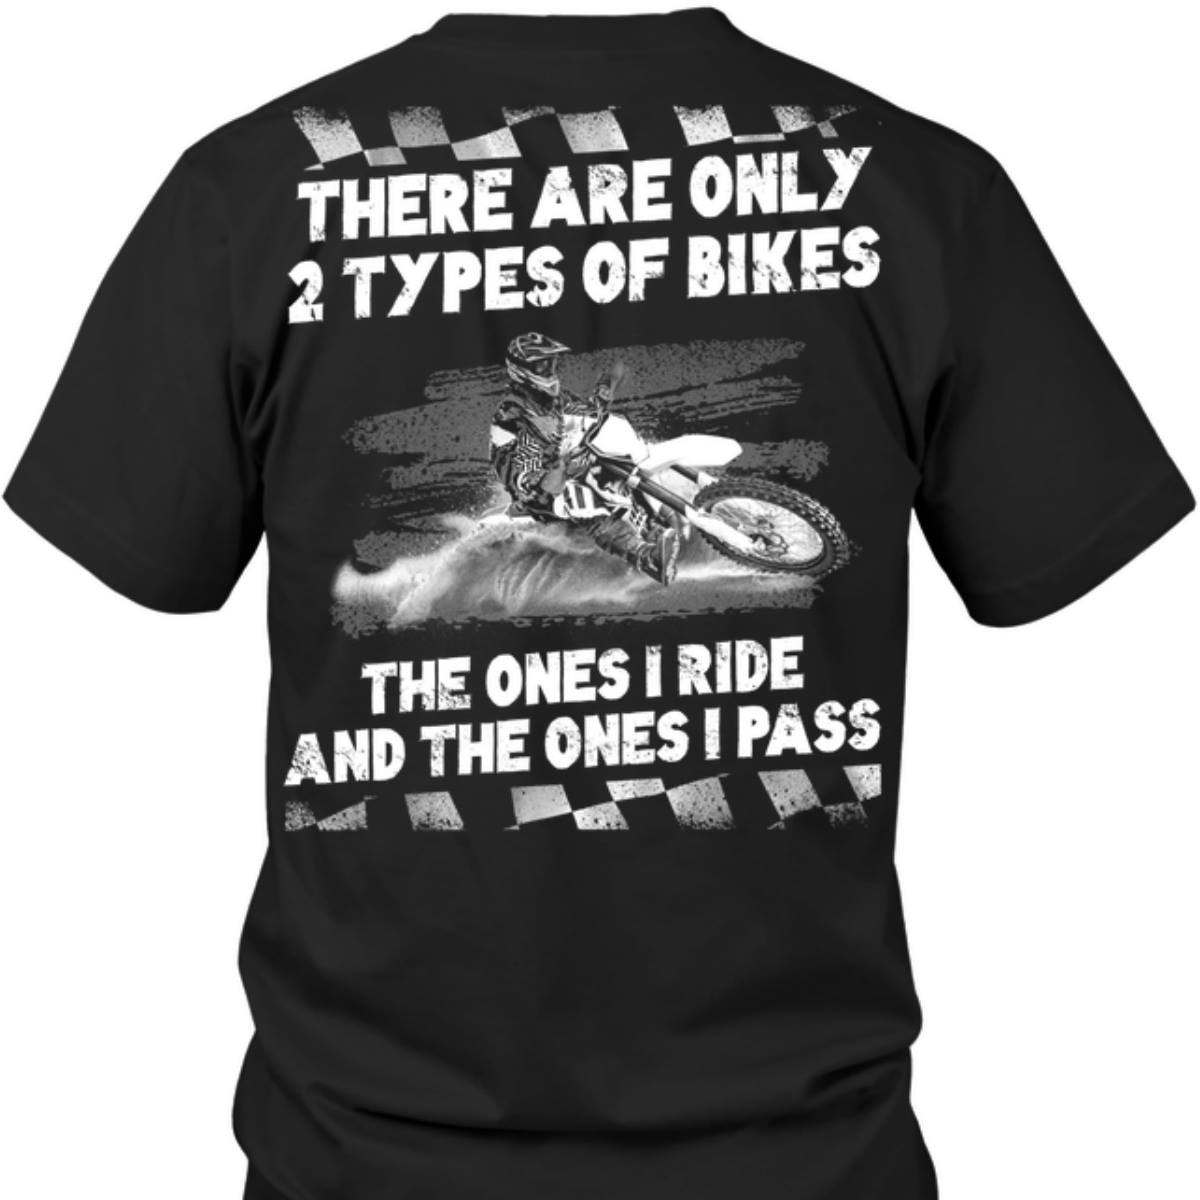 Motorcycle Racing - There are only 2 types of bikes The ones i ride and the ones i pass